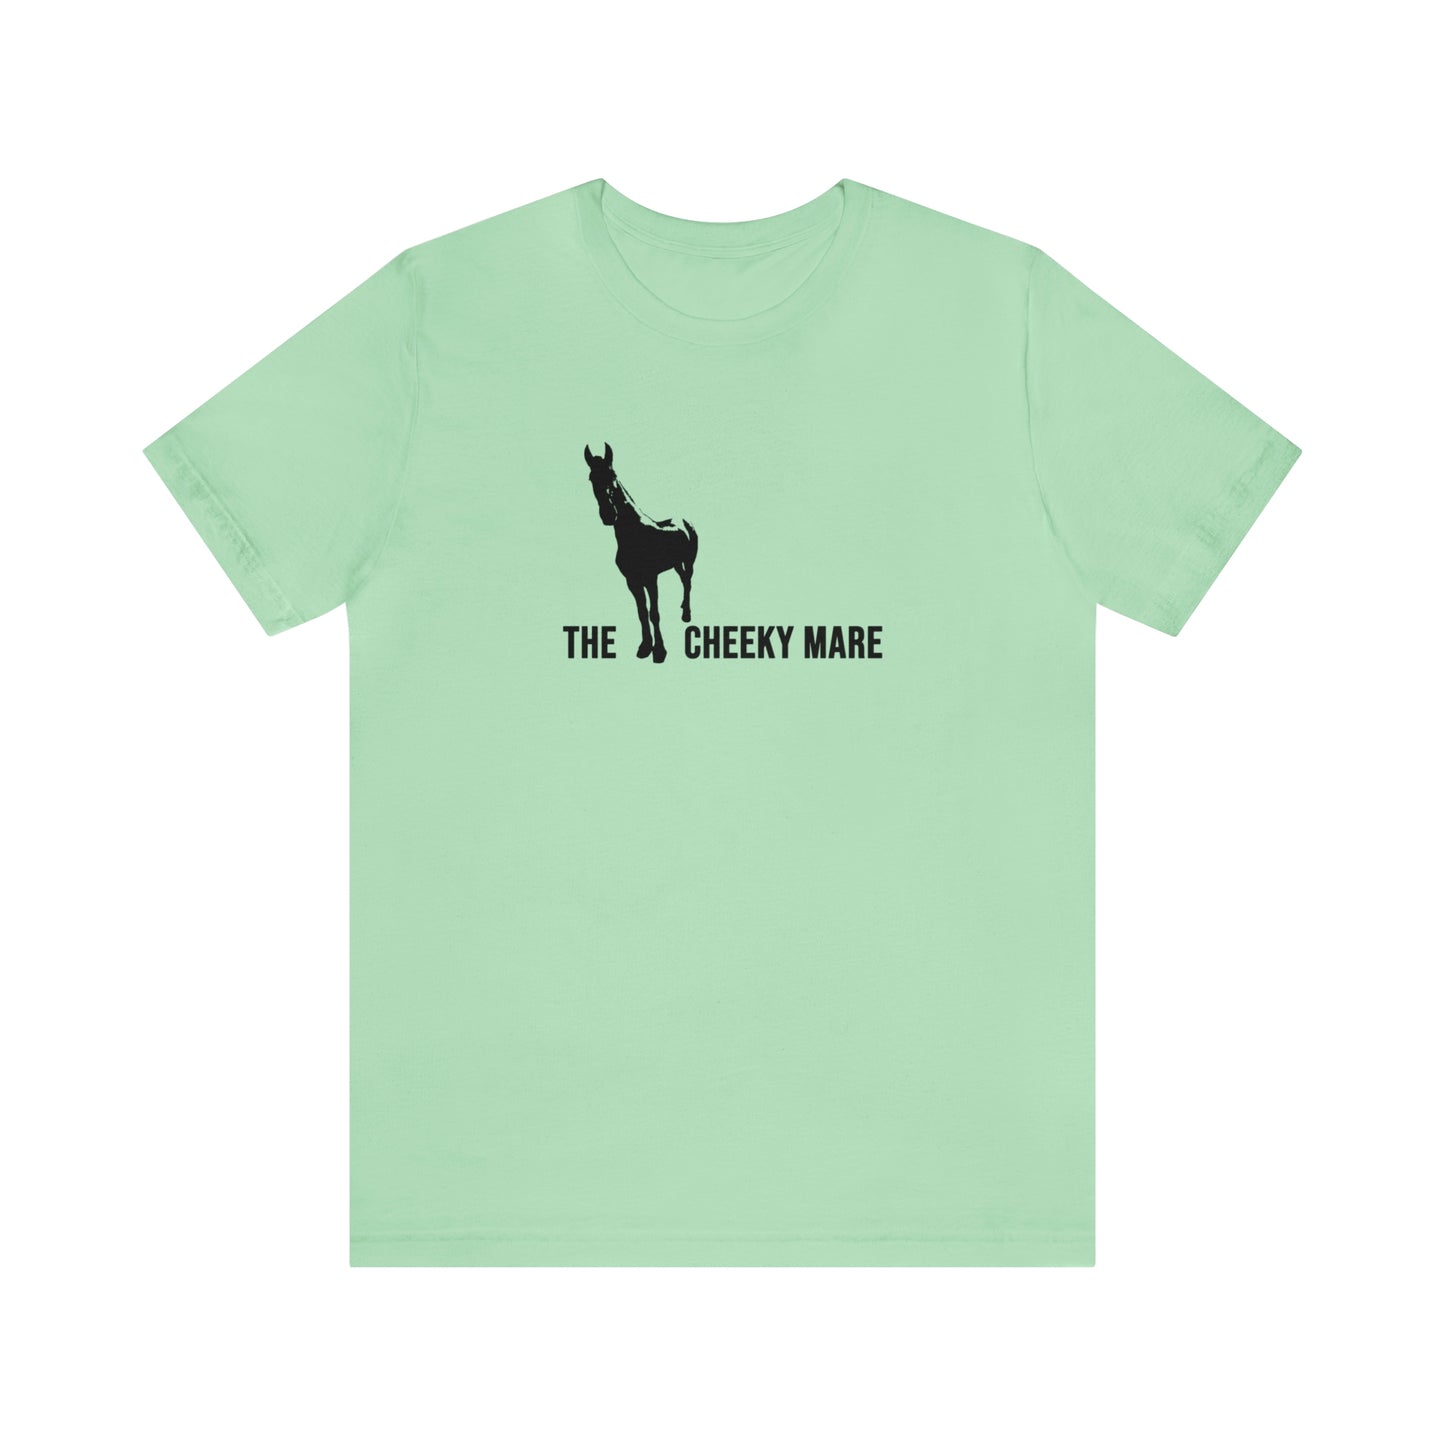 The Cheeky Mare  Super Soft Tee